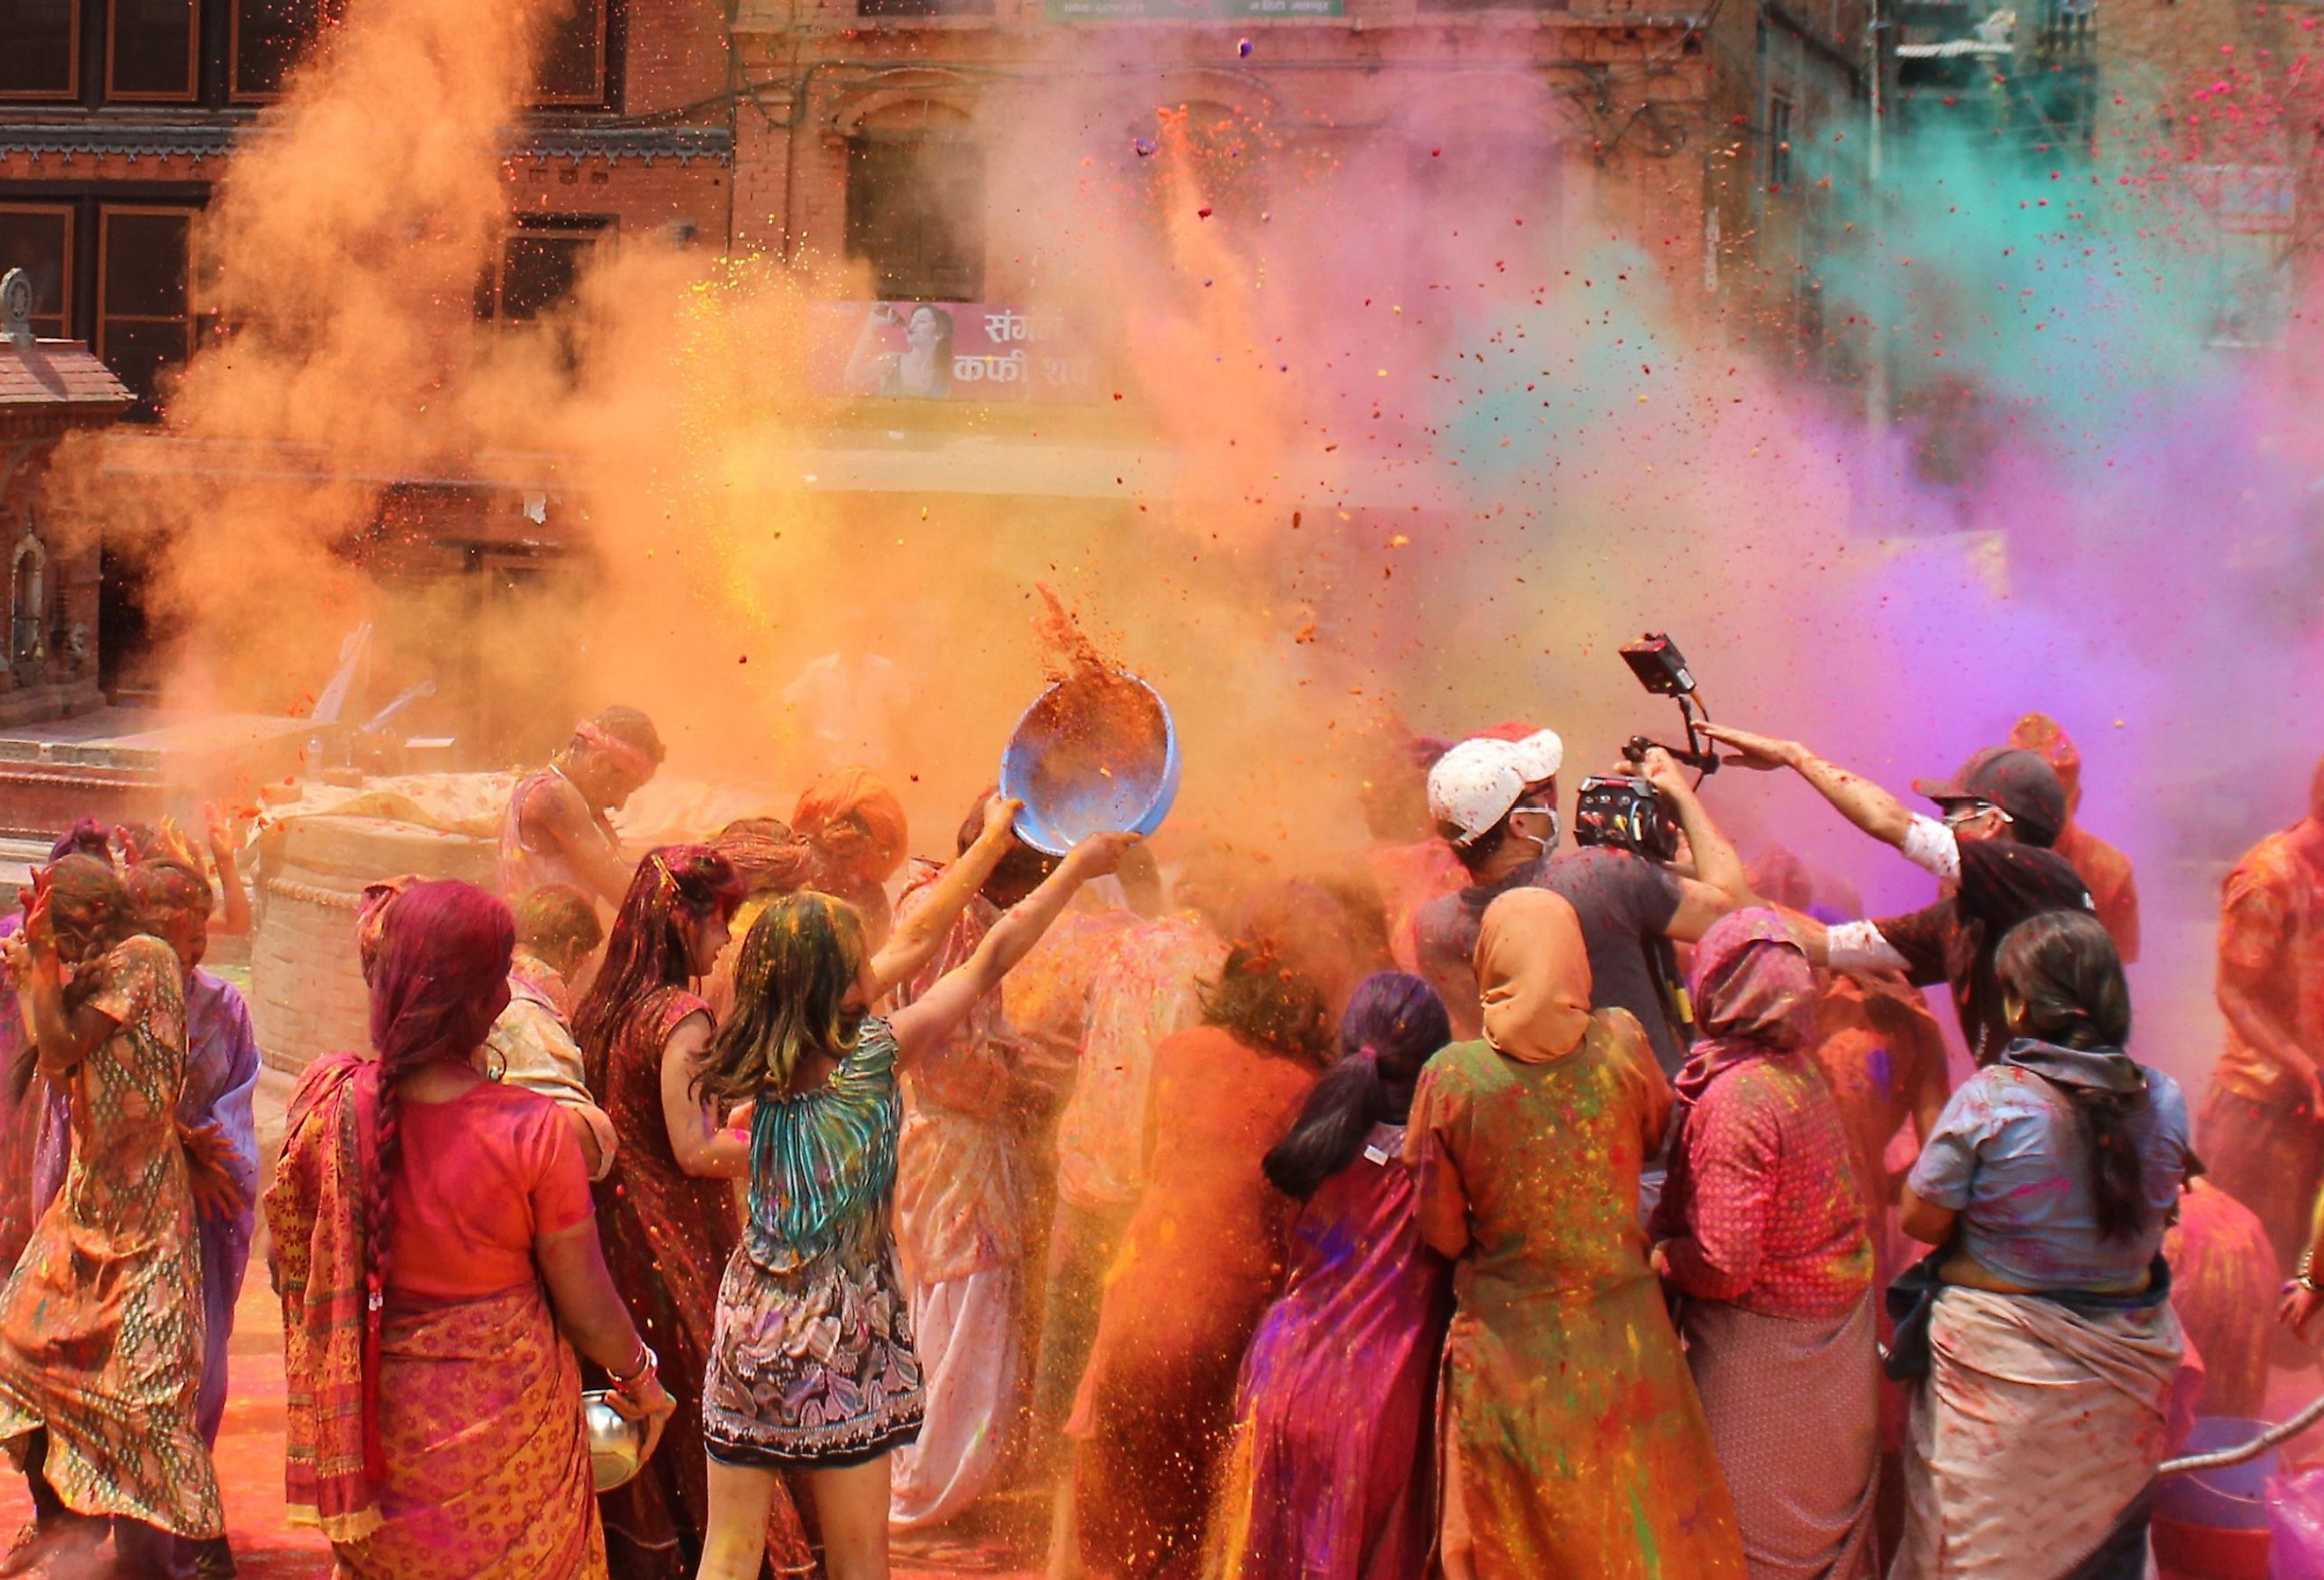 Stunning colors at the Holi festival in Nepal. Image credit Kristin F. Ruhs via Shutterstock